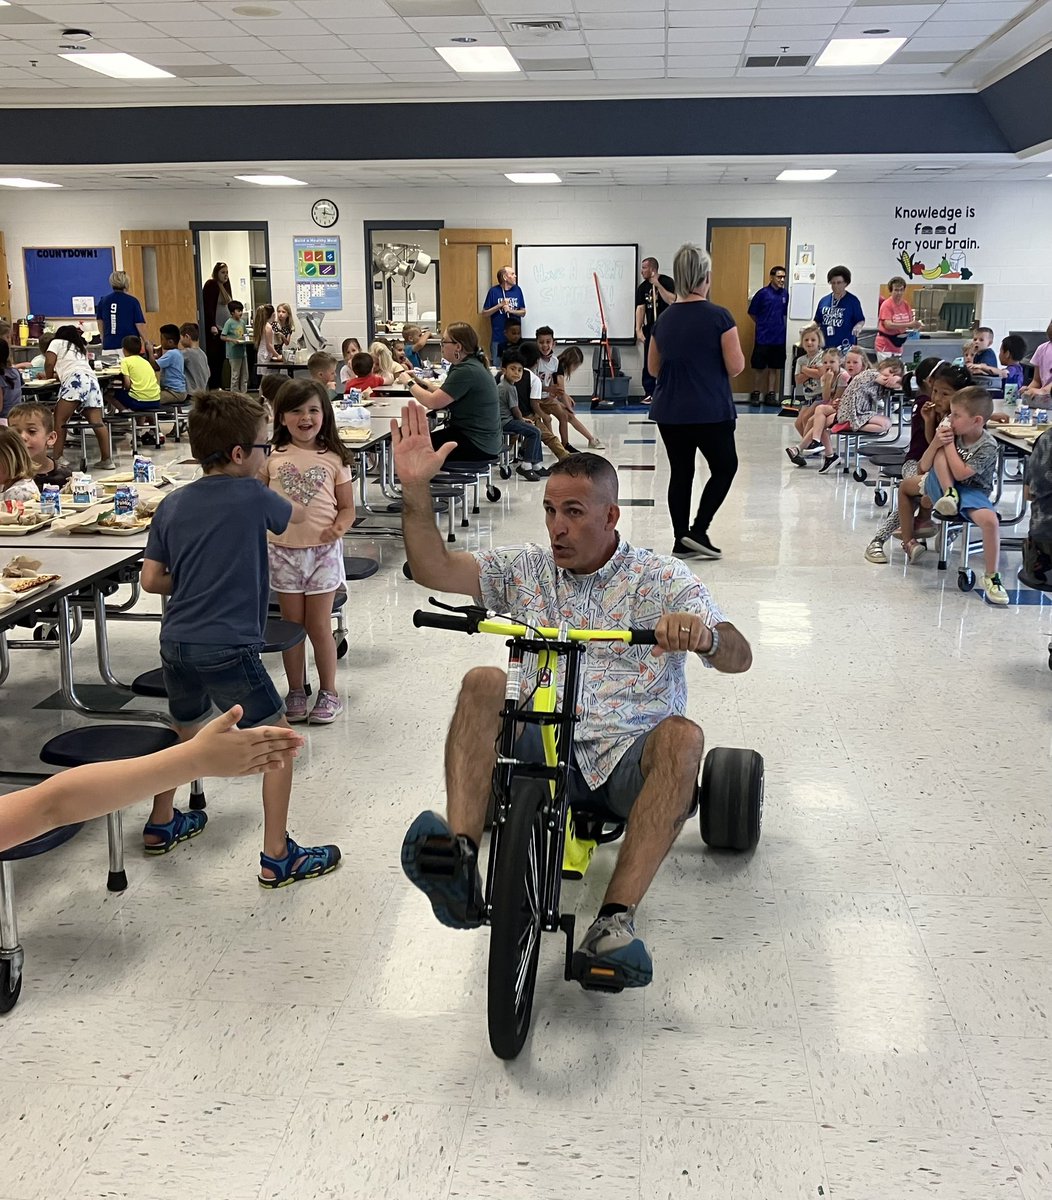 The excitement a trike can bring as you ride it through a cafeteria!  #principalsinaction @theVAESP #kidsdeserveit @RazorWorldwide @NAESP